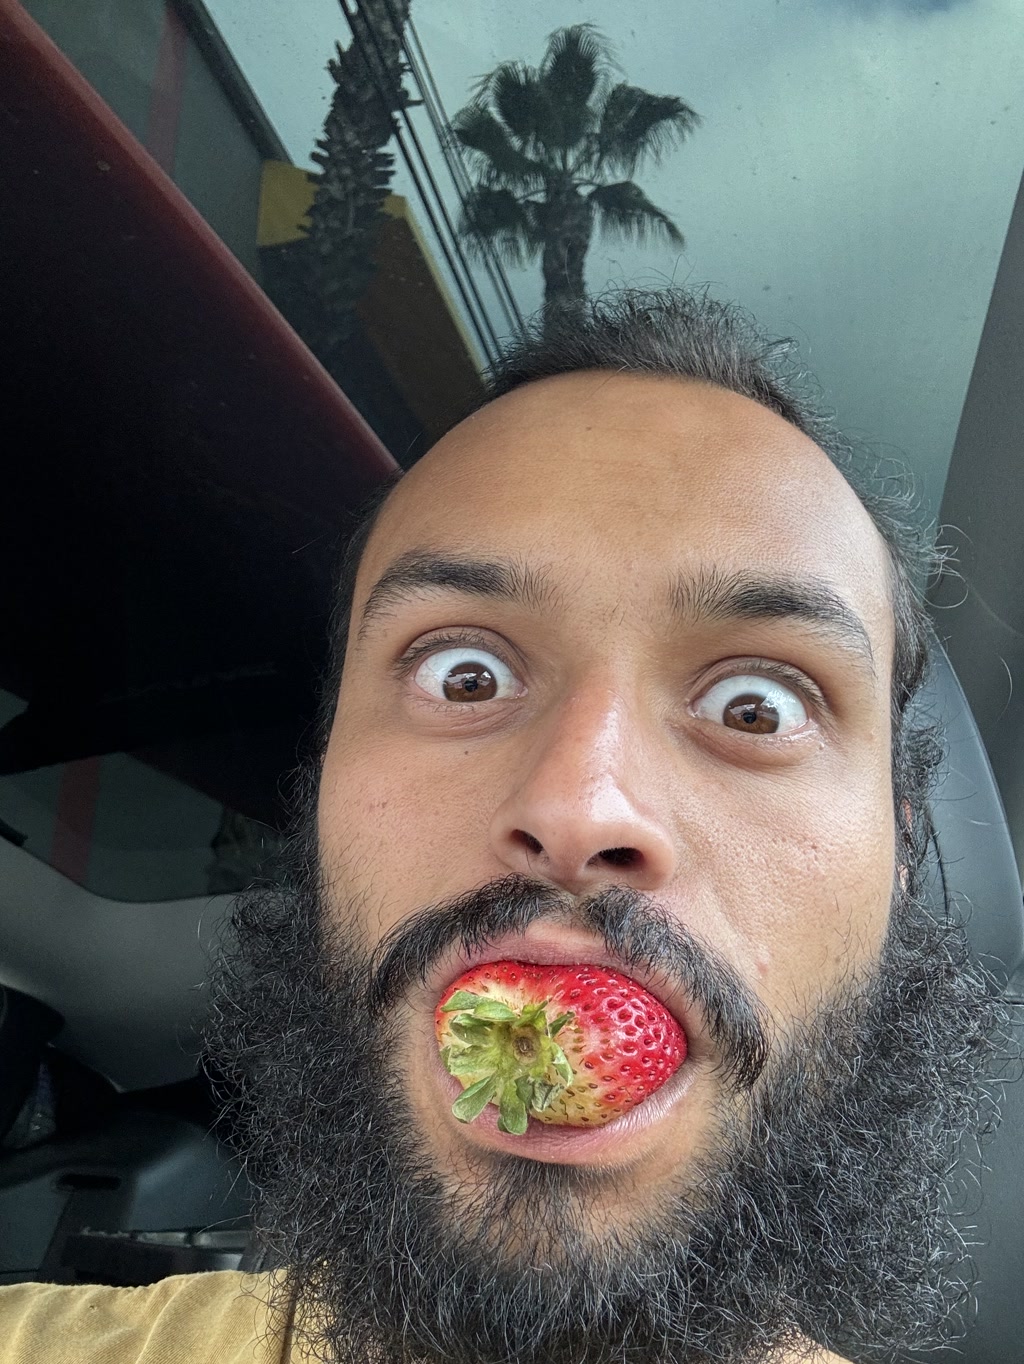 A person with a sizable, well-groomed beard and wide, surprised-looking eyes is holding a large strawberry in their mouth. The strawberry is positioned with the green leafy top pointing outwards, making it appear as if it is sticking out of the person's mouth. The individual has dark hair and eyebrows, and there's a suggestion of a vehicle interior reflected in the window behind, which also shows a couple of palm tree silhouettes against the sky.